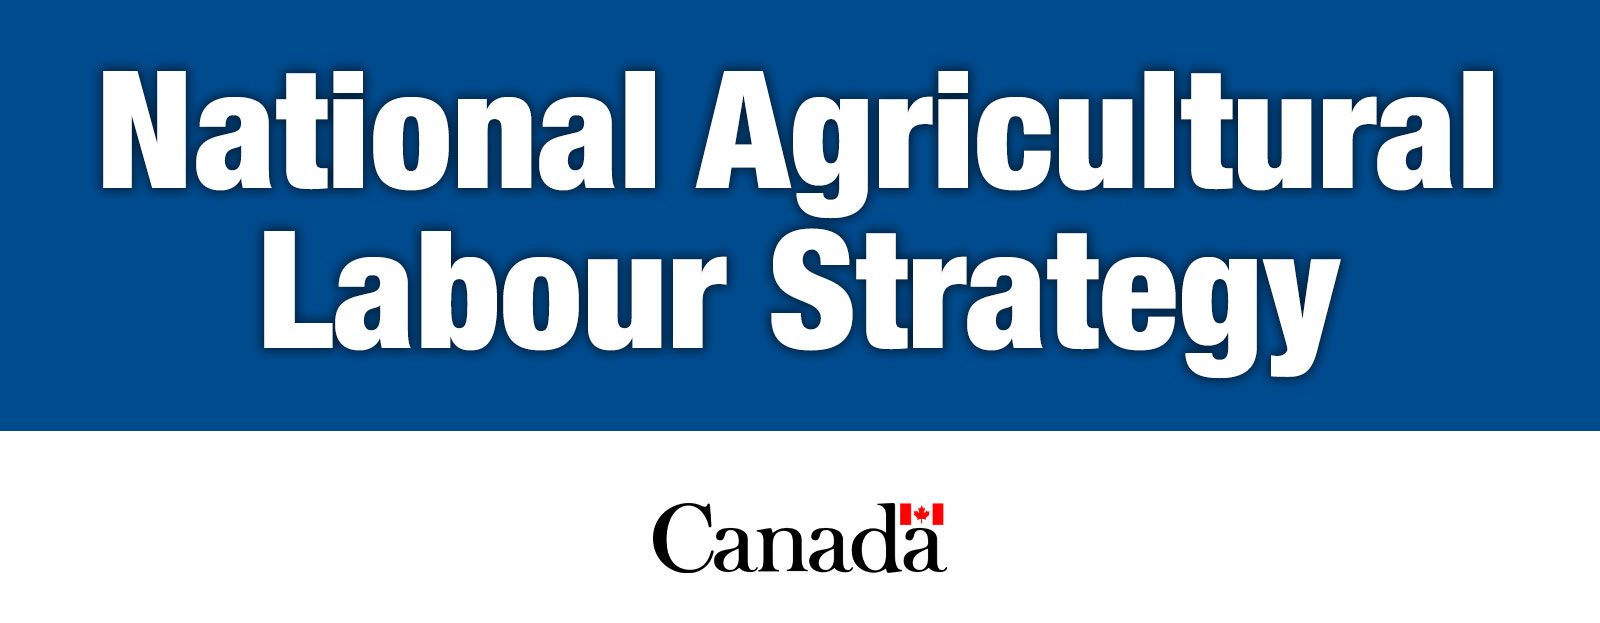 National Agricultural Labour Strategy